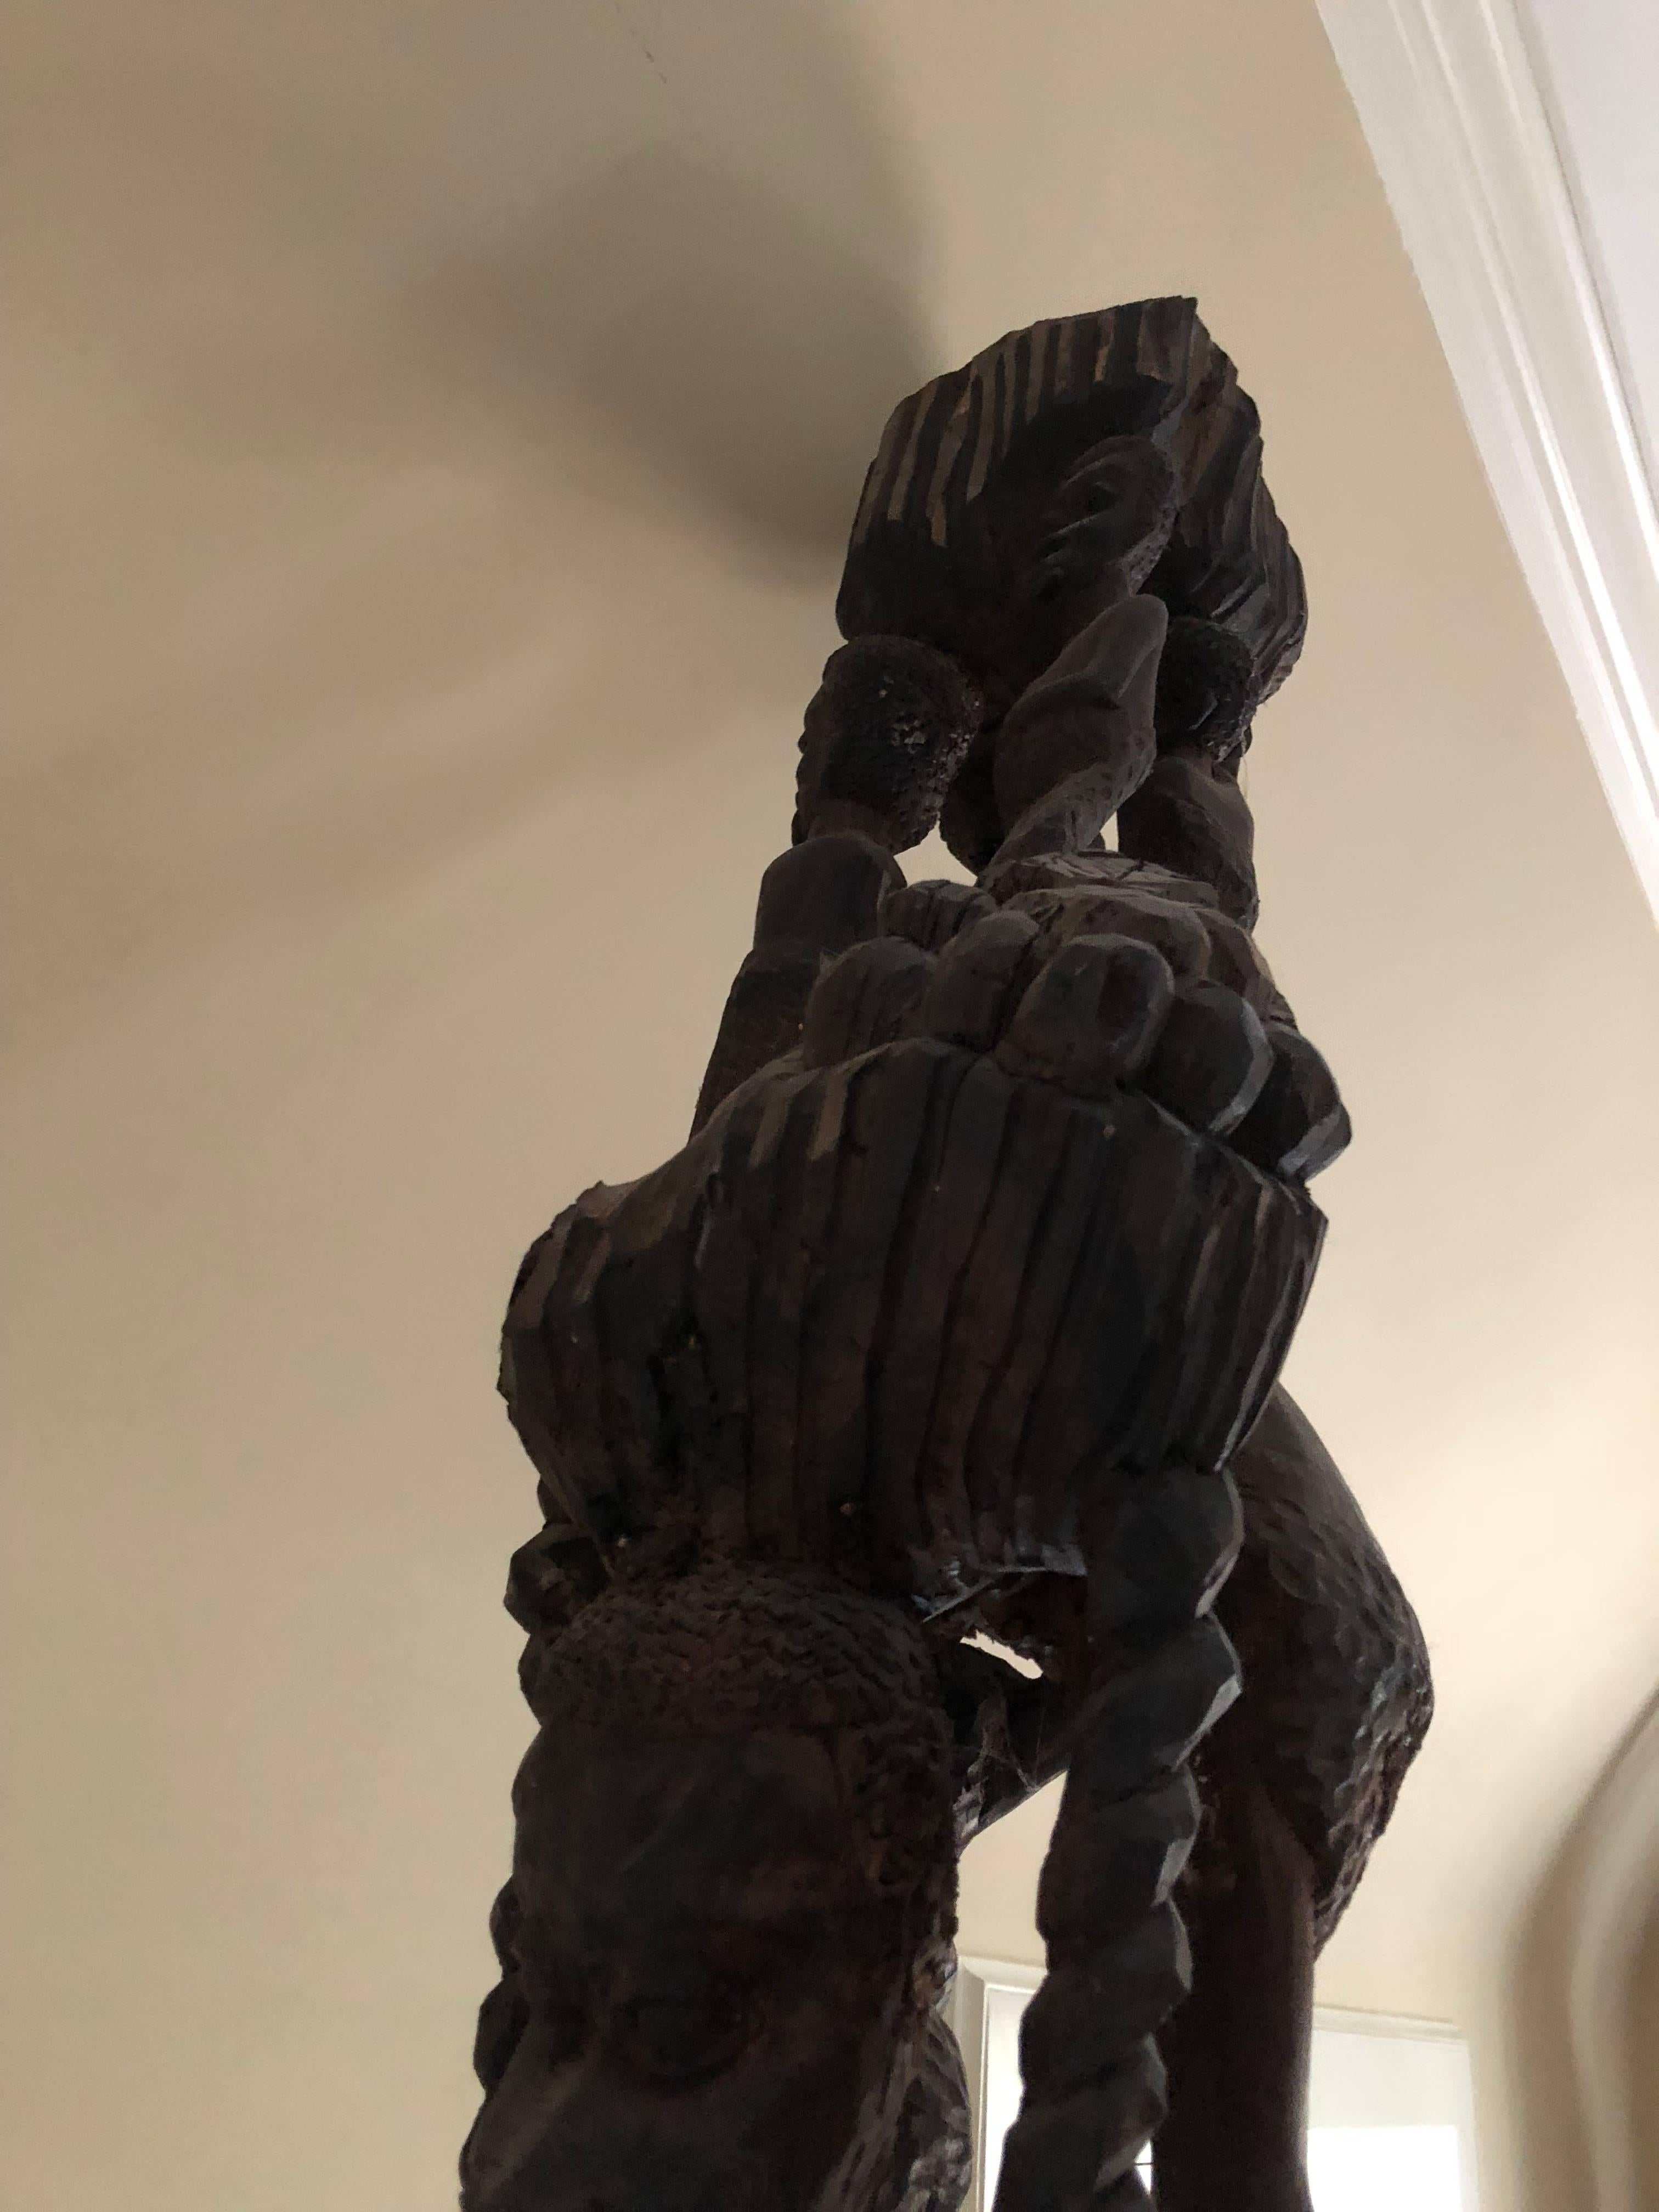 Kenyan Super Tall Fabulously Hand-Carved African Sculpture